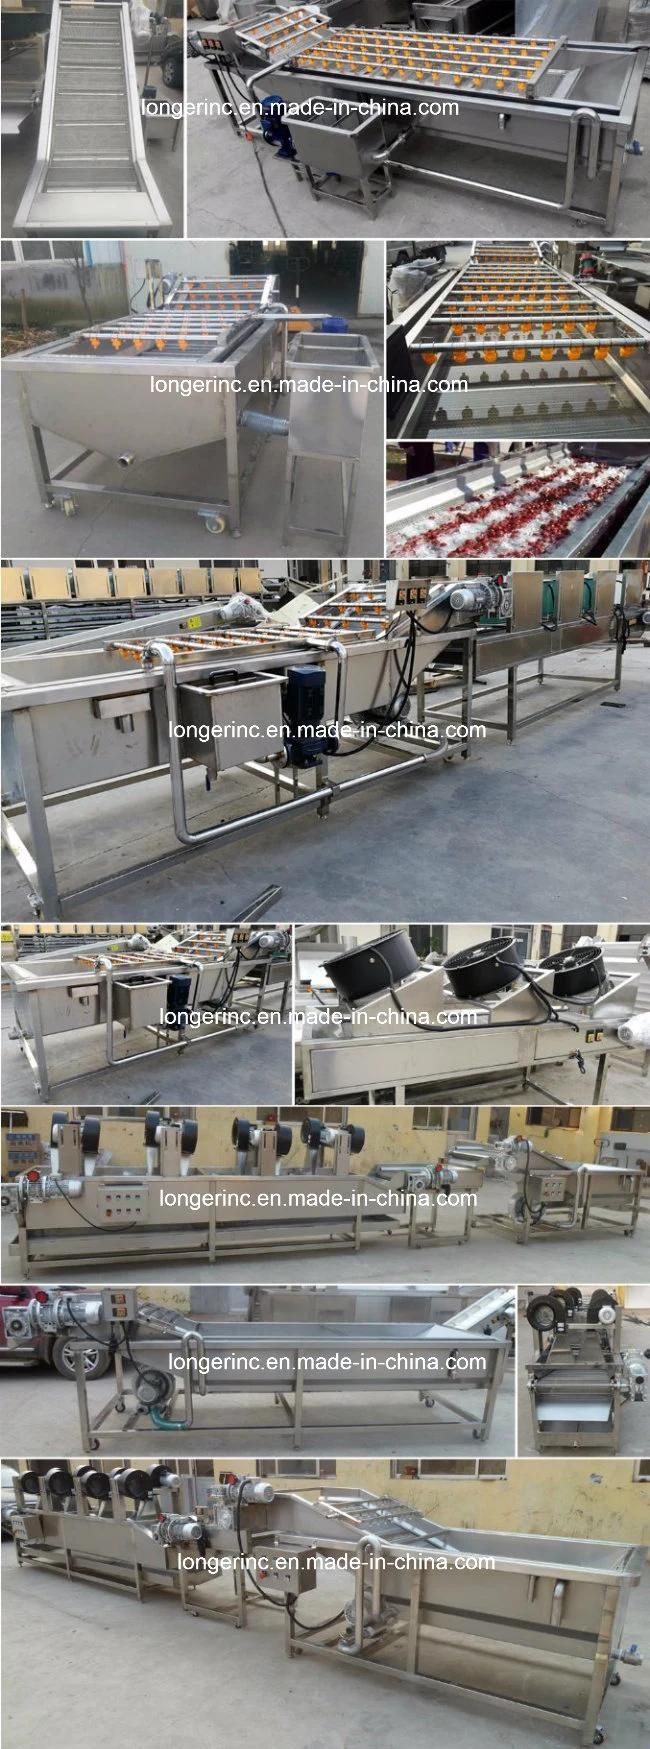 Industrial High Pressure Fruit and Vegetable Washer Machine